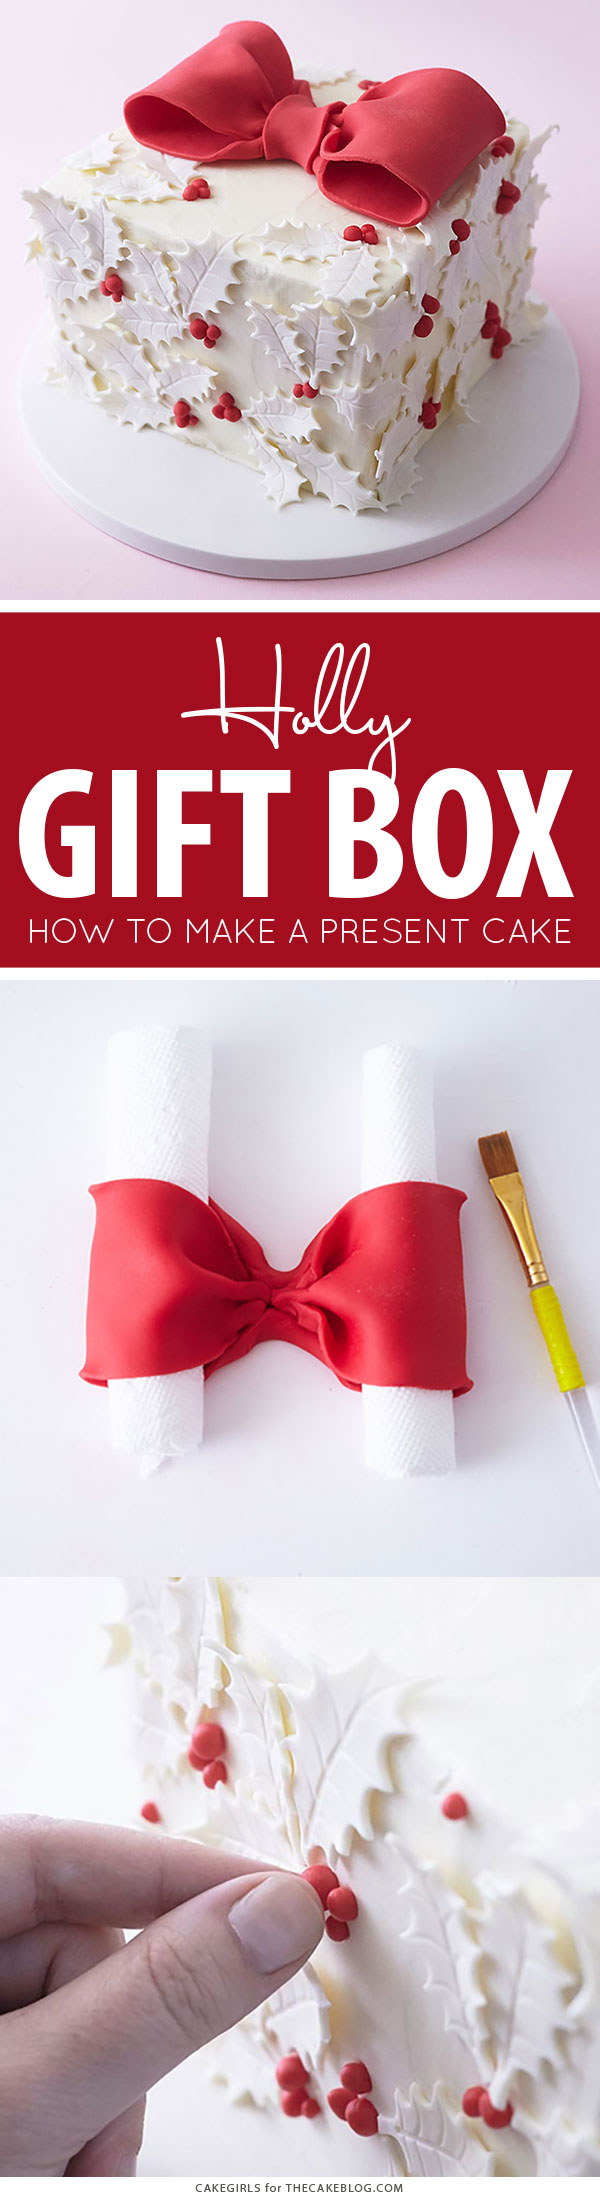 Holly Gift Box Cake! Learn how to make this festive gift box cake that looks just like a present | by Cakegirls for TheCakeBlog.com